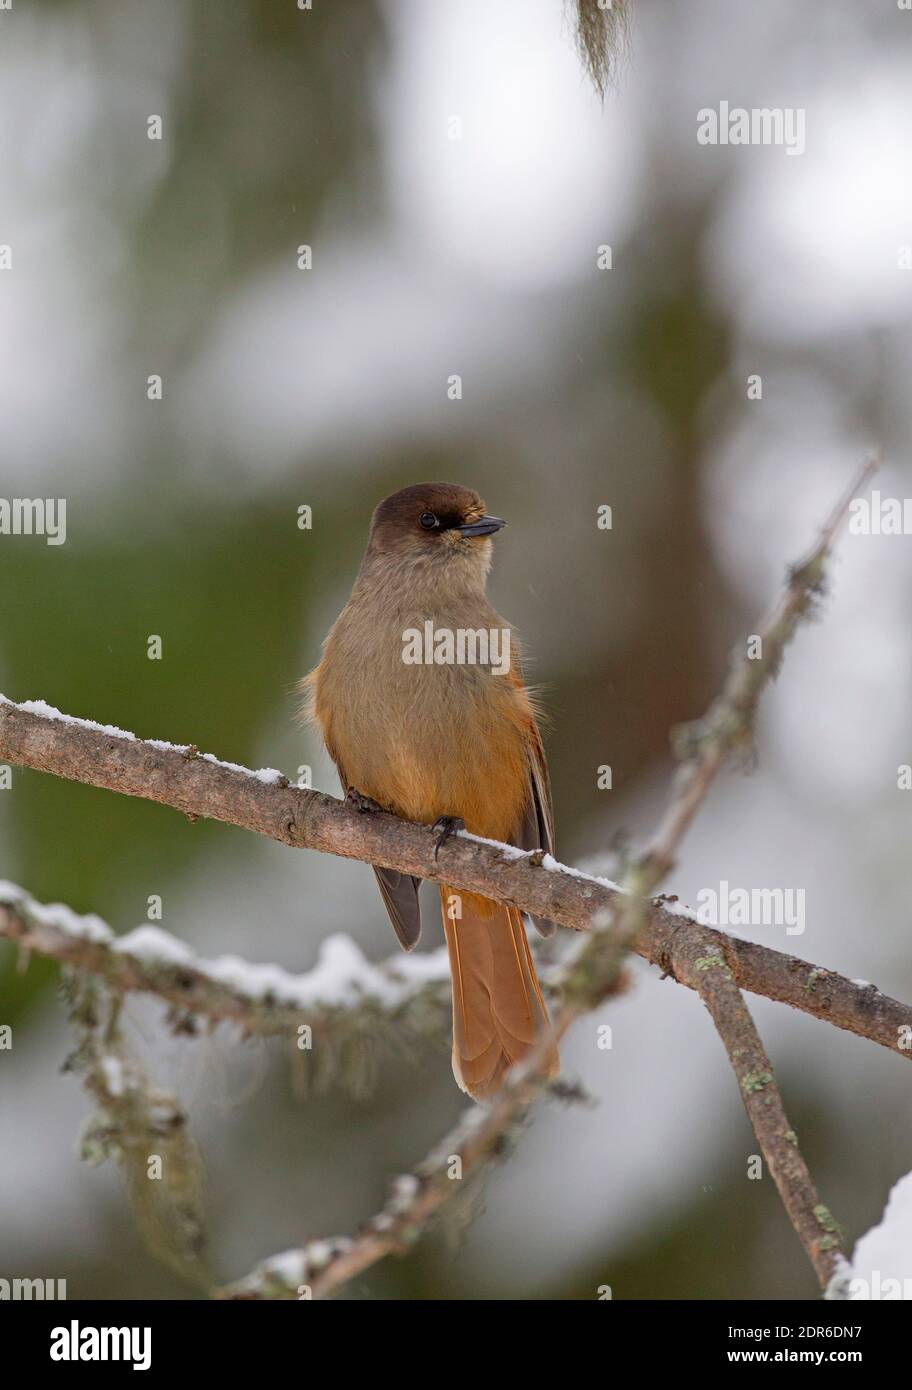 Siberian Jay, Perisoreus infaustus, single adult perched in tree. Taken February, Central Sweden. Stock Photo